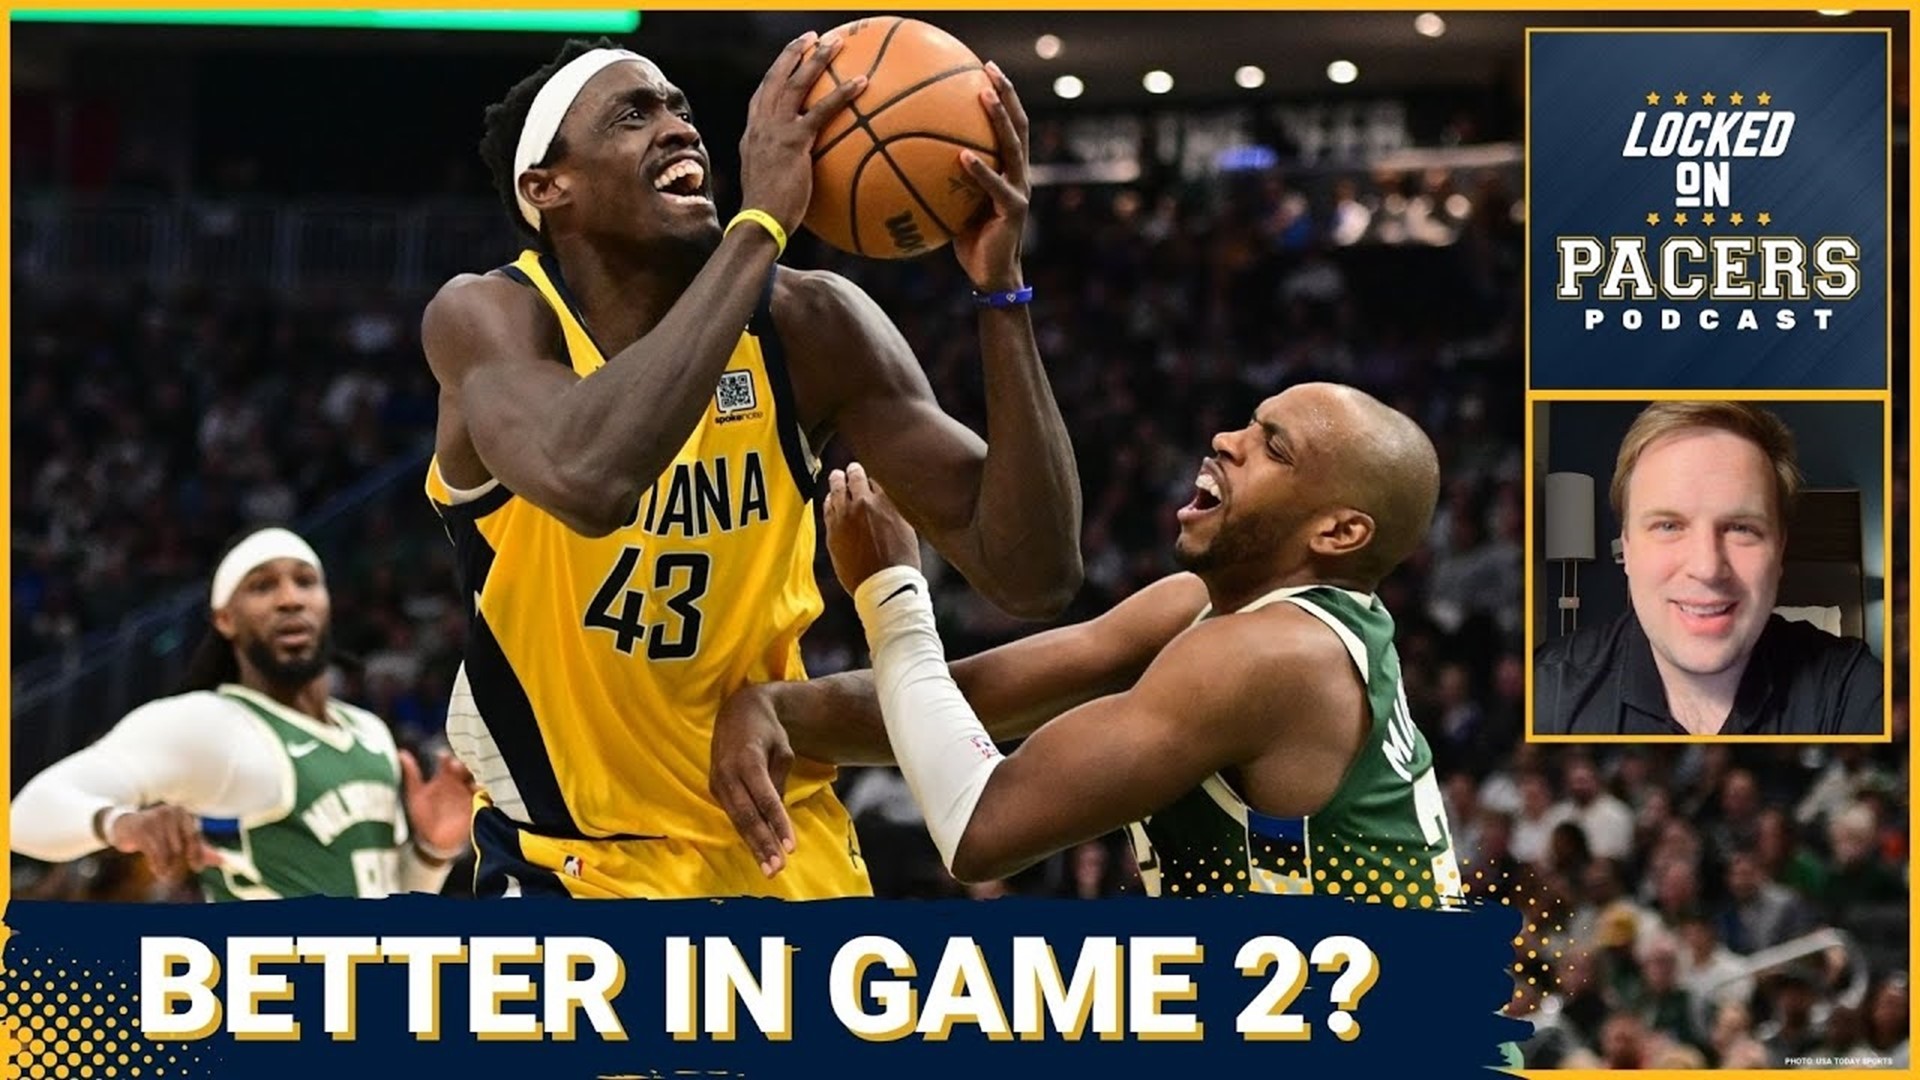 The Indiana Pacers were humiliated in Game 1 of their first round series against the Milwaukee Bucks. What do they need to change ahead of Game 2?